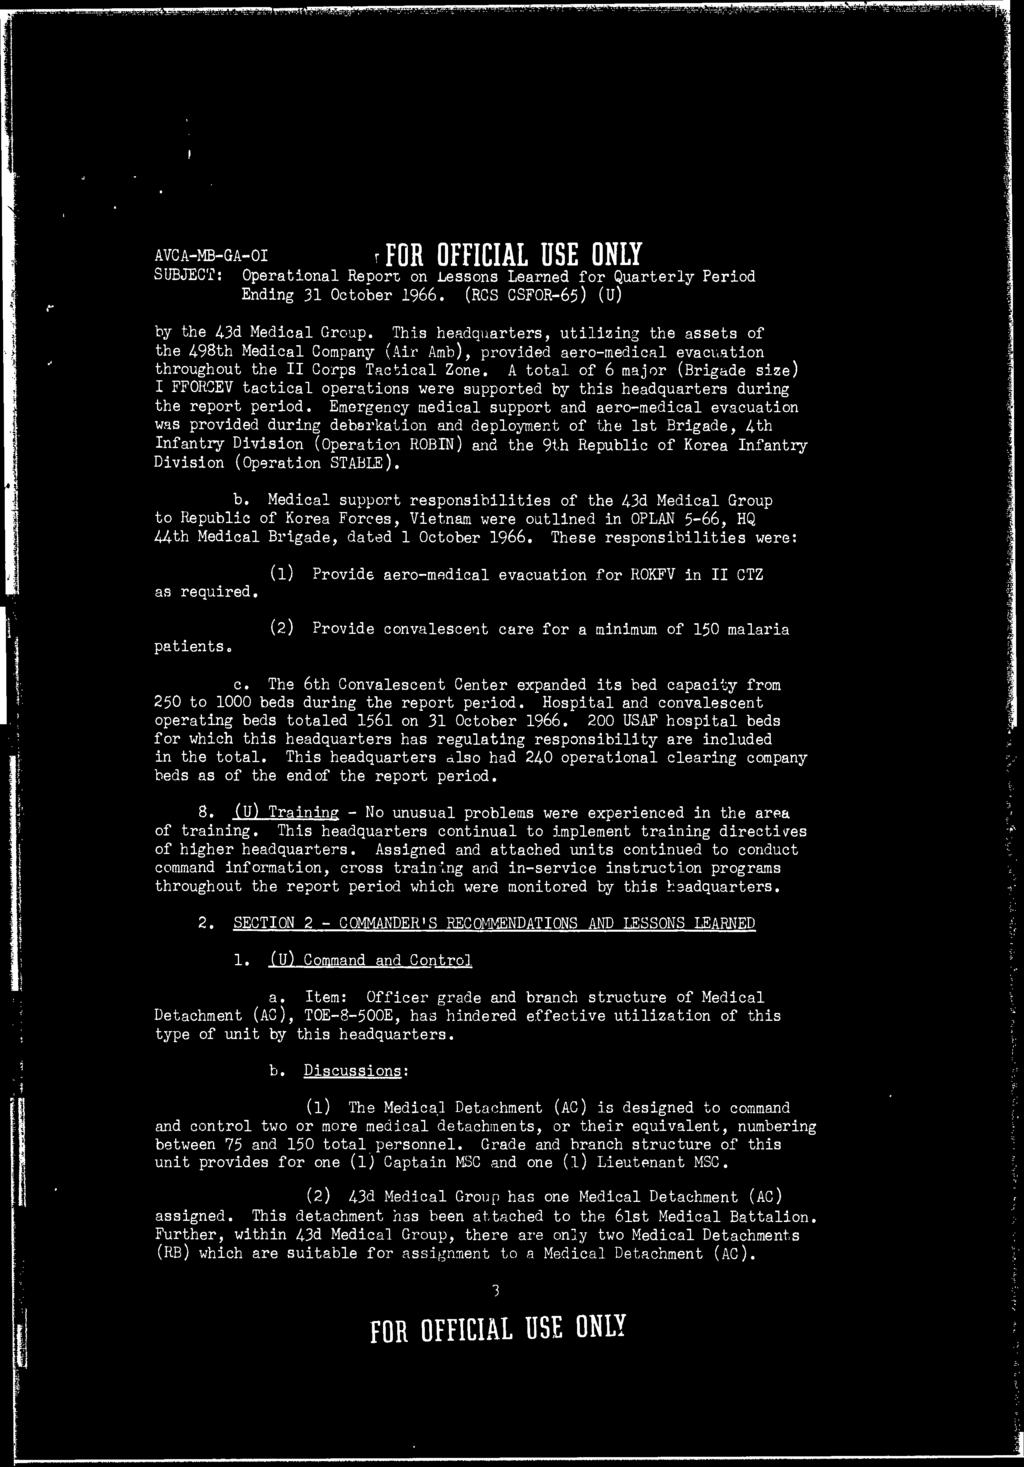 ...L1..I. ji.mjumjw»mimiwk Lmwi^^^ IHHIH'IWPPW AVCA-MB-GA-OI r SUBJECT: Operational Report on Lessons Learned for Quarterly Period Ending 31 October 1966. (RCS CSFOR-65) (U) by the 4.3d Medical Group.